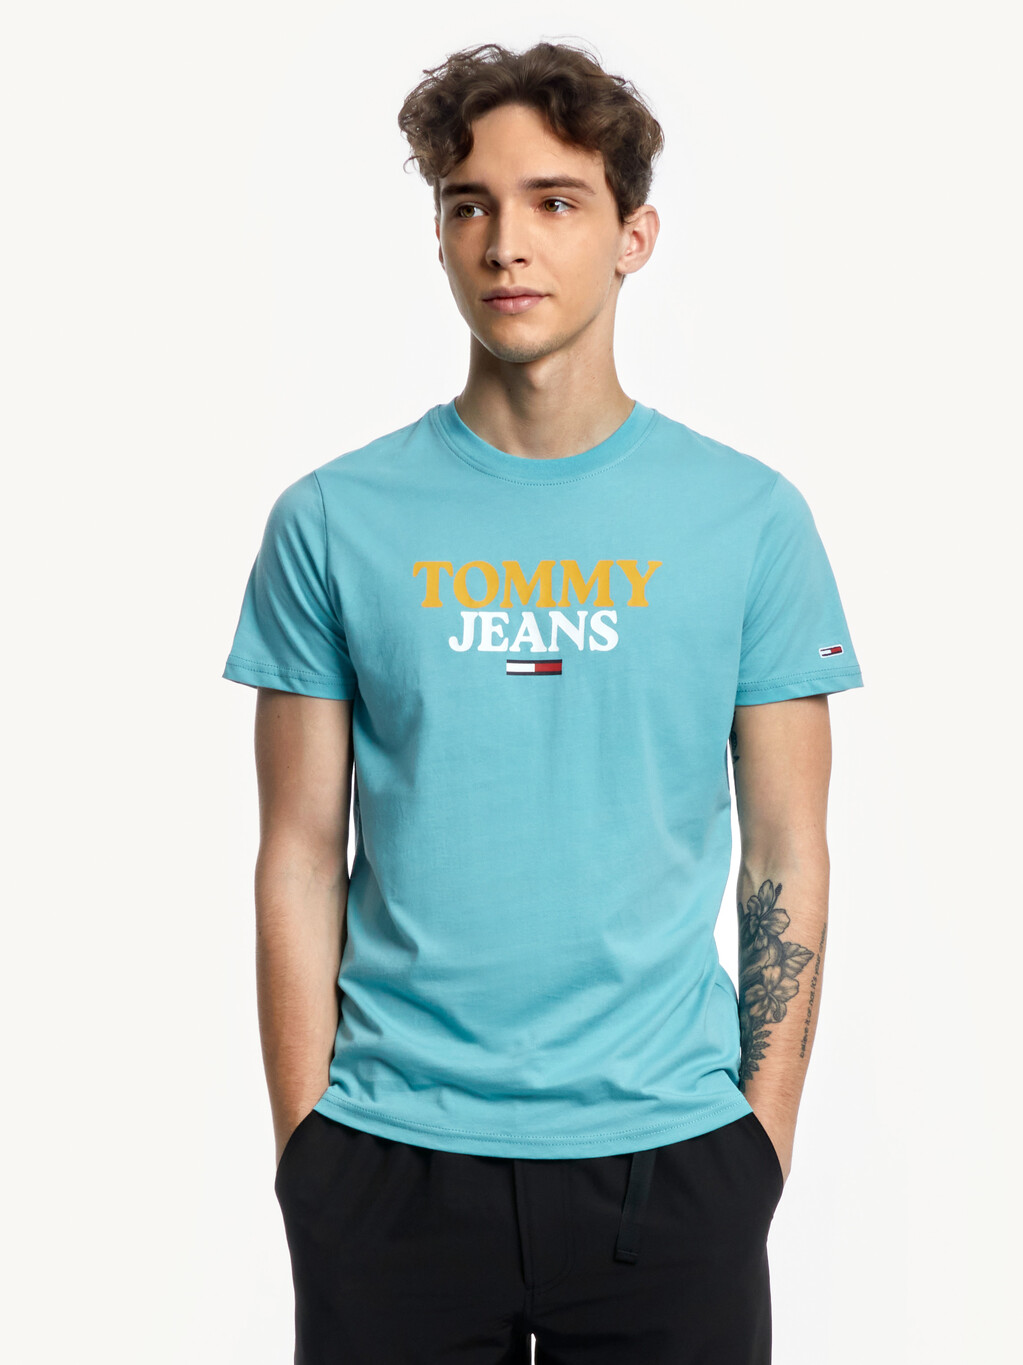 Buy TOMMY JEANS LOGO GRAPHIC T-SHIRT in color CREST